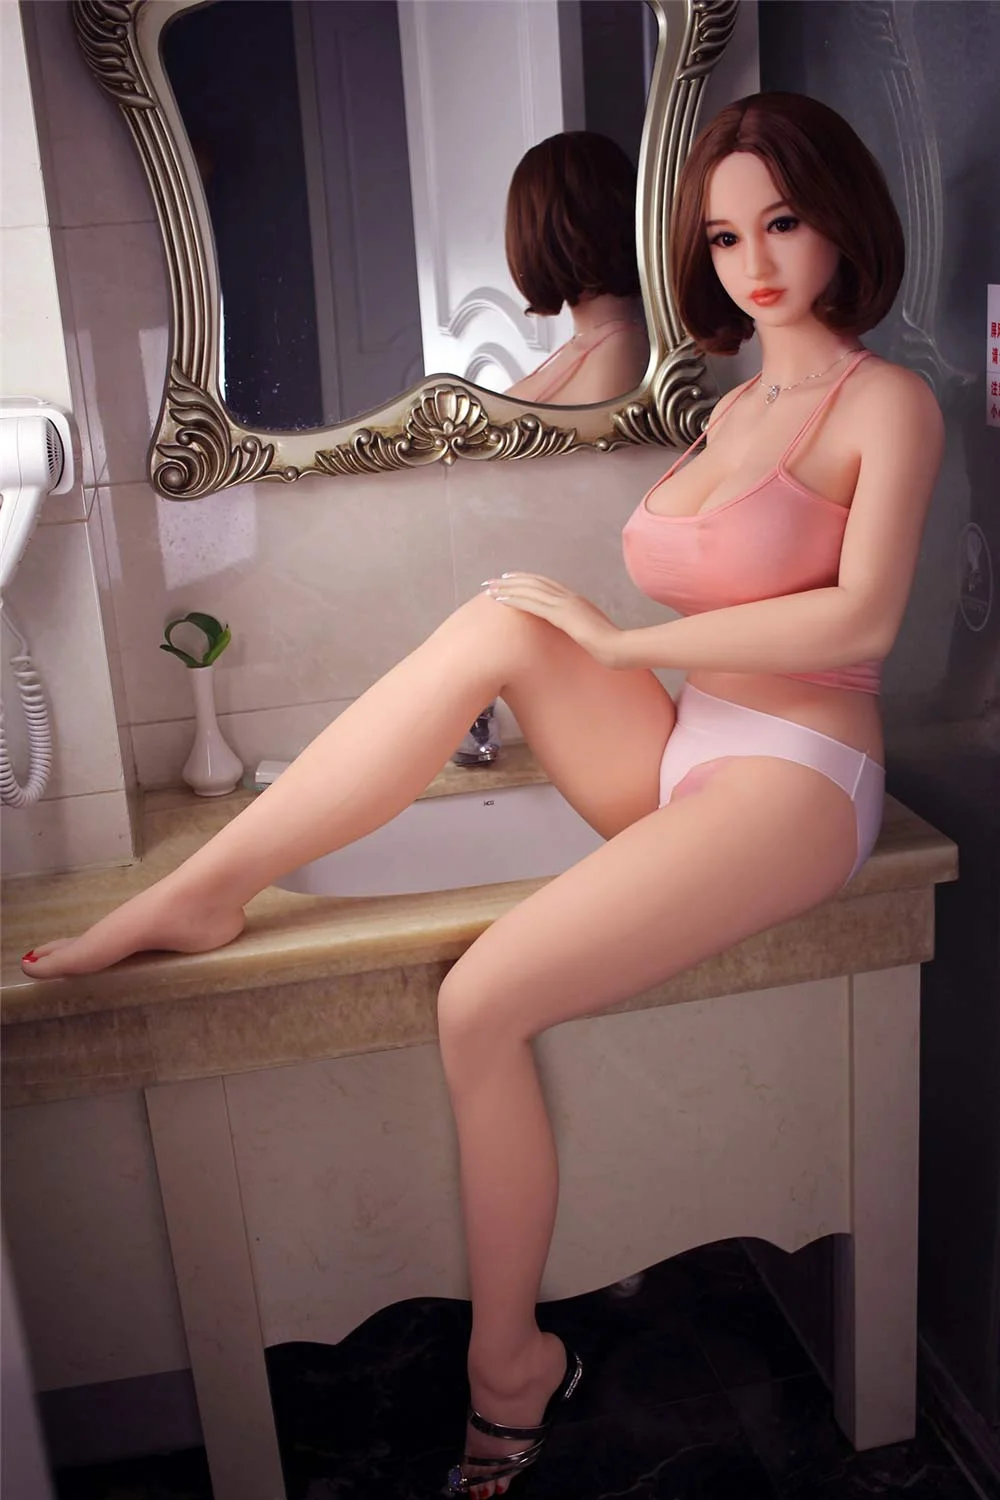 Sex doll sitting on the sink and touching thigh